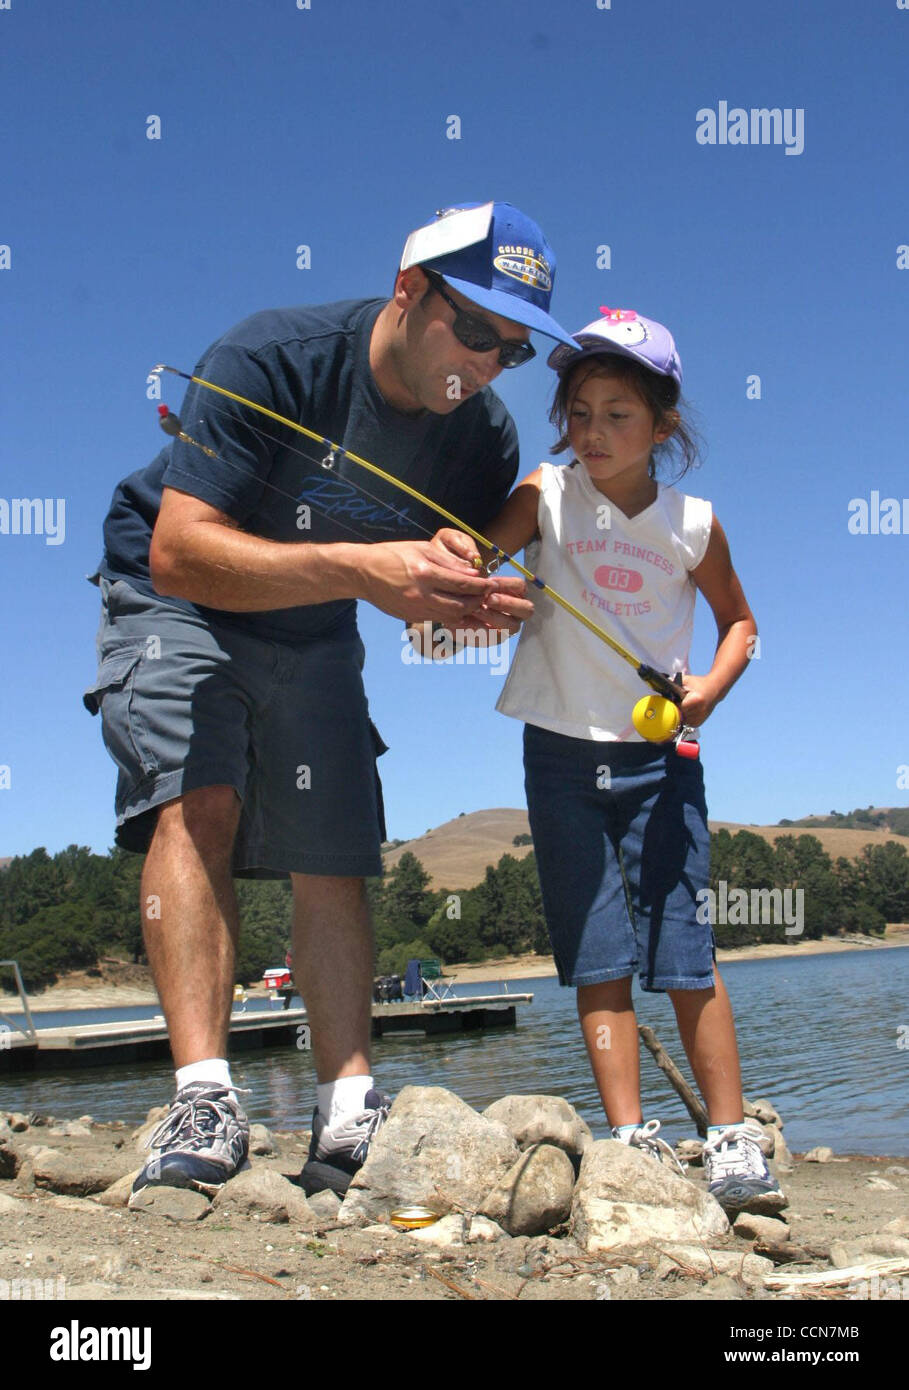 (COMMUNITY PAGE ART) Mike Attard (cq) helps his daughter, Siena Attard (cq)(right), bait her hook while fishing at San Pablo Reservoir in Orinda, Calif. on Wednesday, August 25, 2004. Mike and wife Stefania Attard, from South San Francisco, have been visiting the reservoir for years and now bring th Stock Photo